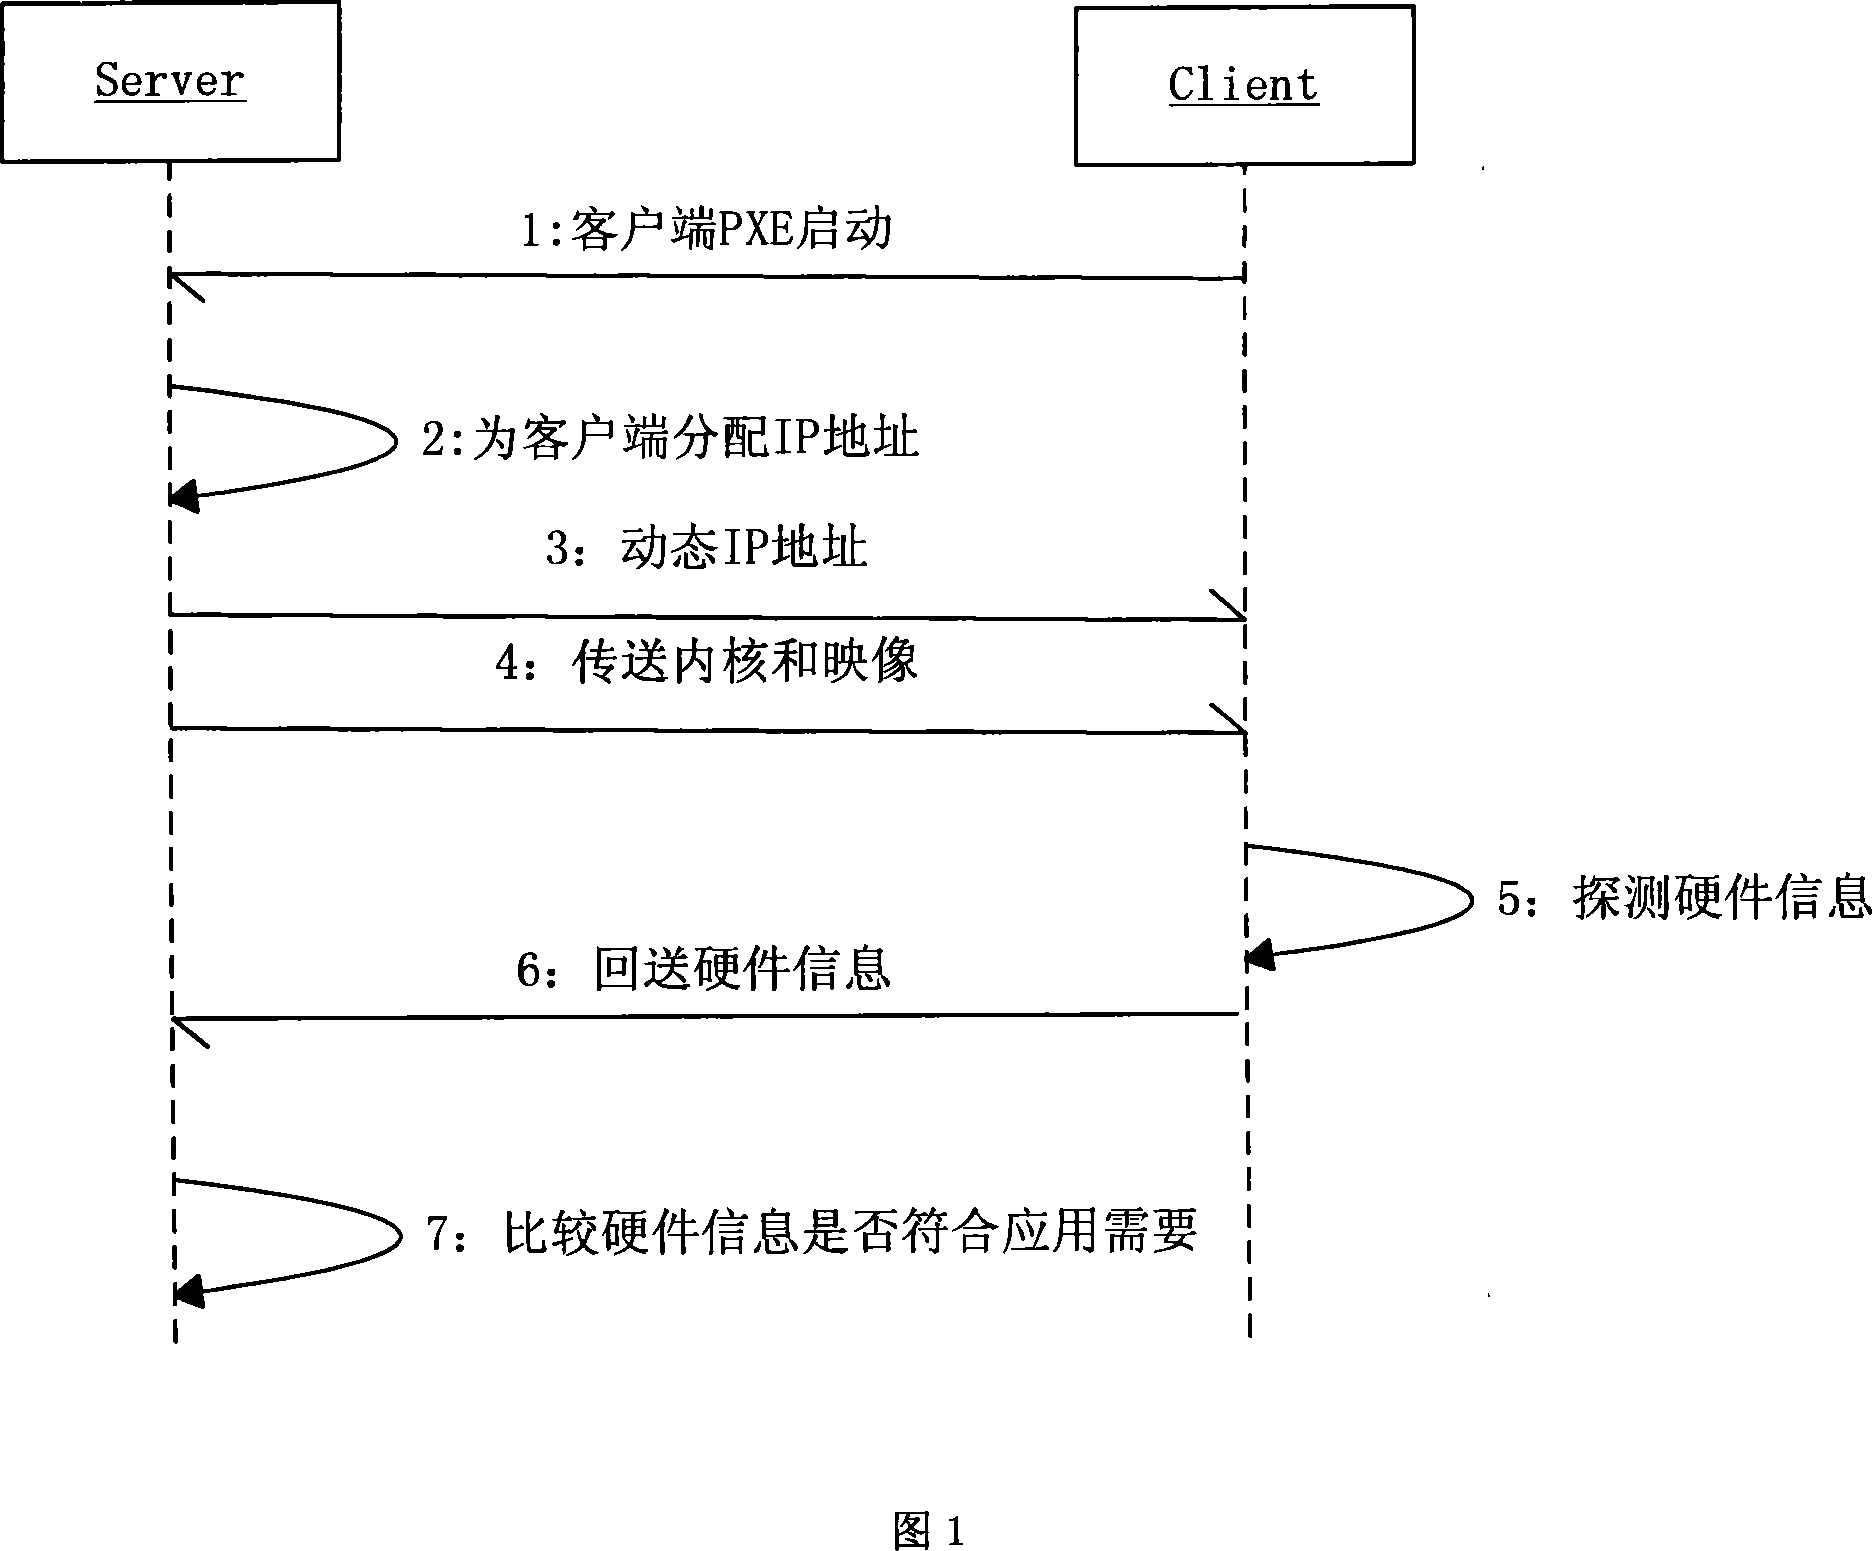 Method of automatically detecting server hardware information